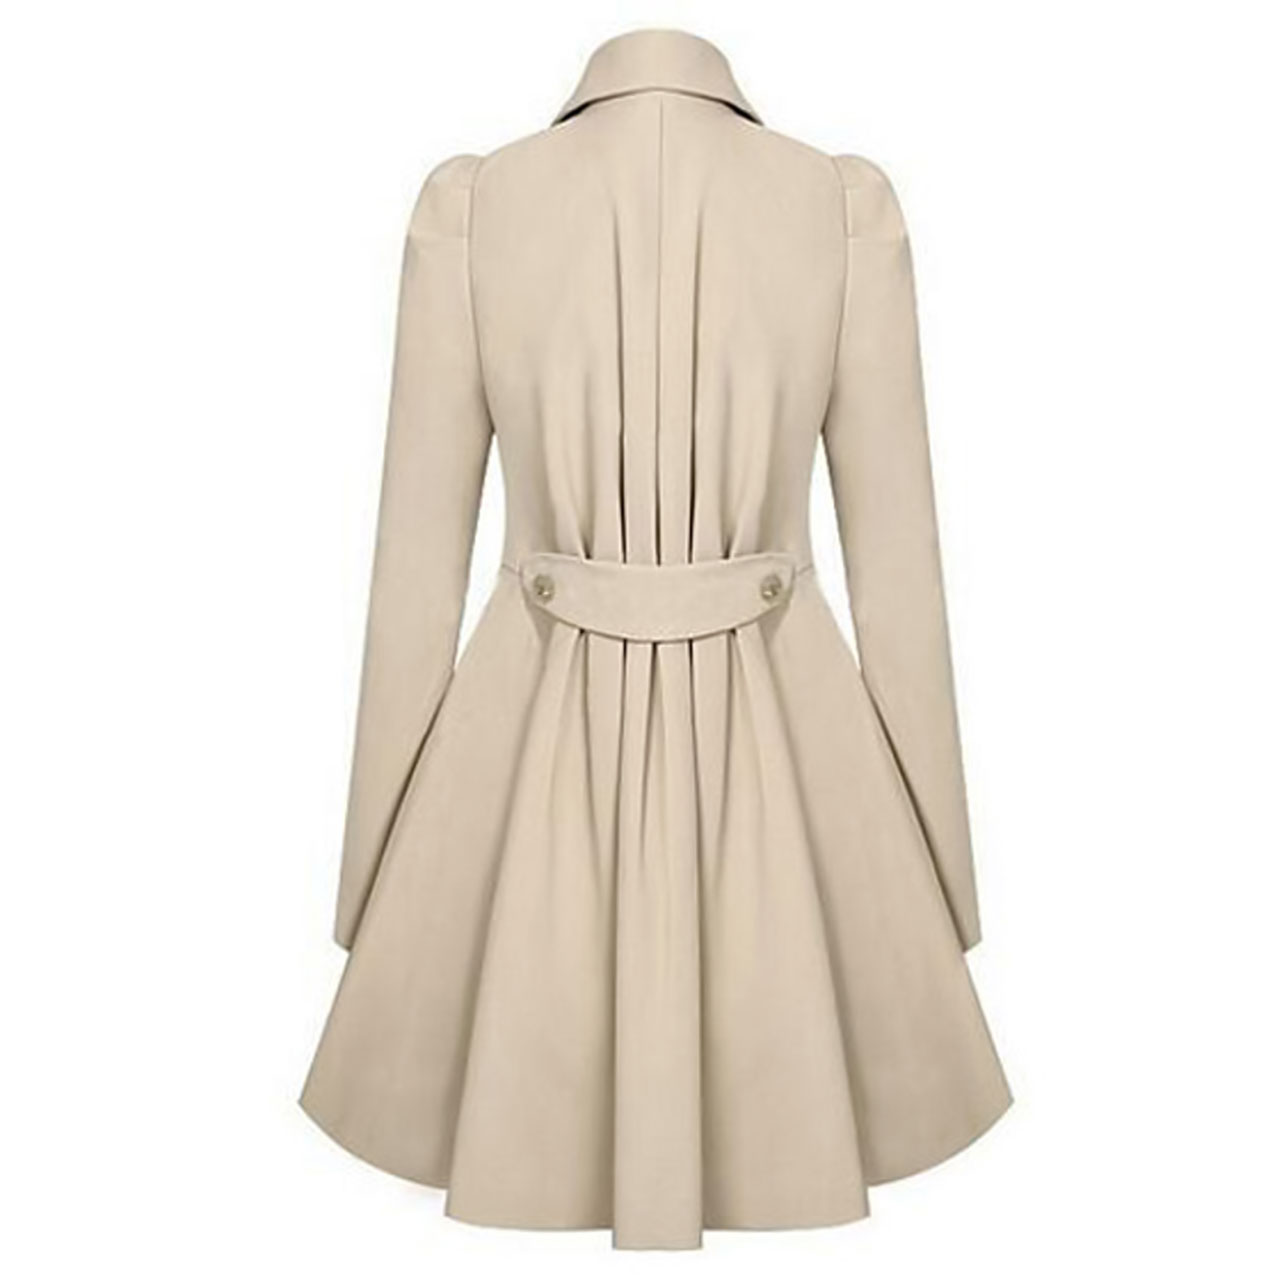 Women's Daily Spring Long Trench Coat, Solid Colored Shirt Collar Long Sleeve Polyester Khaki